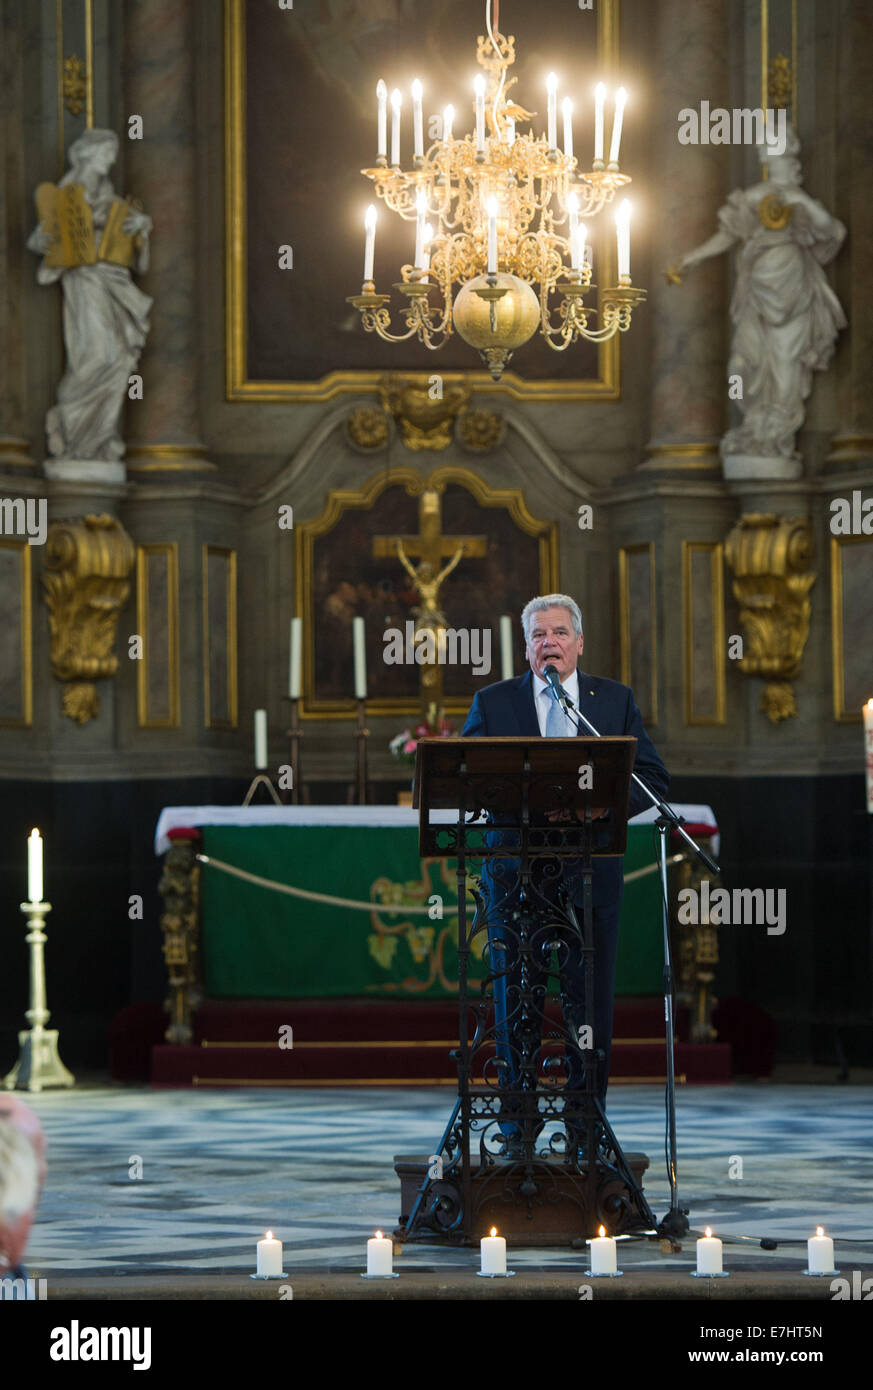 Rostock, Germany. 18th Sep, 2014. German President Joachim Gauck speaks at Saint Mary's Church during the 11th meeting of the German-speaking heads of state in Rostock, Germany, 18 September 2014. They are discussing questions about demographic change and remembering the peaceful revolution in East Germany 25 years ago at the informal meeting. Photo: Stefan Sauer/dpa/Alamy Live News Stock Photo